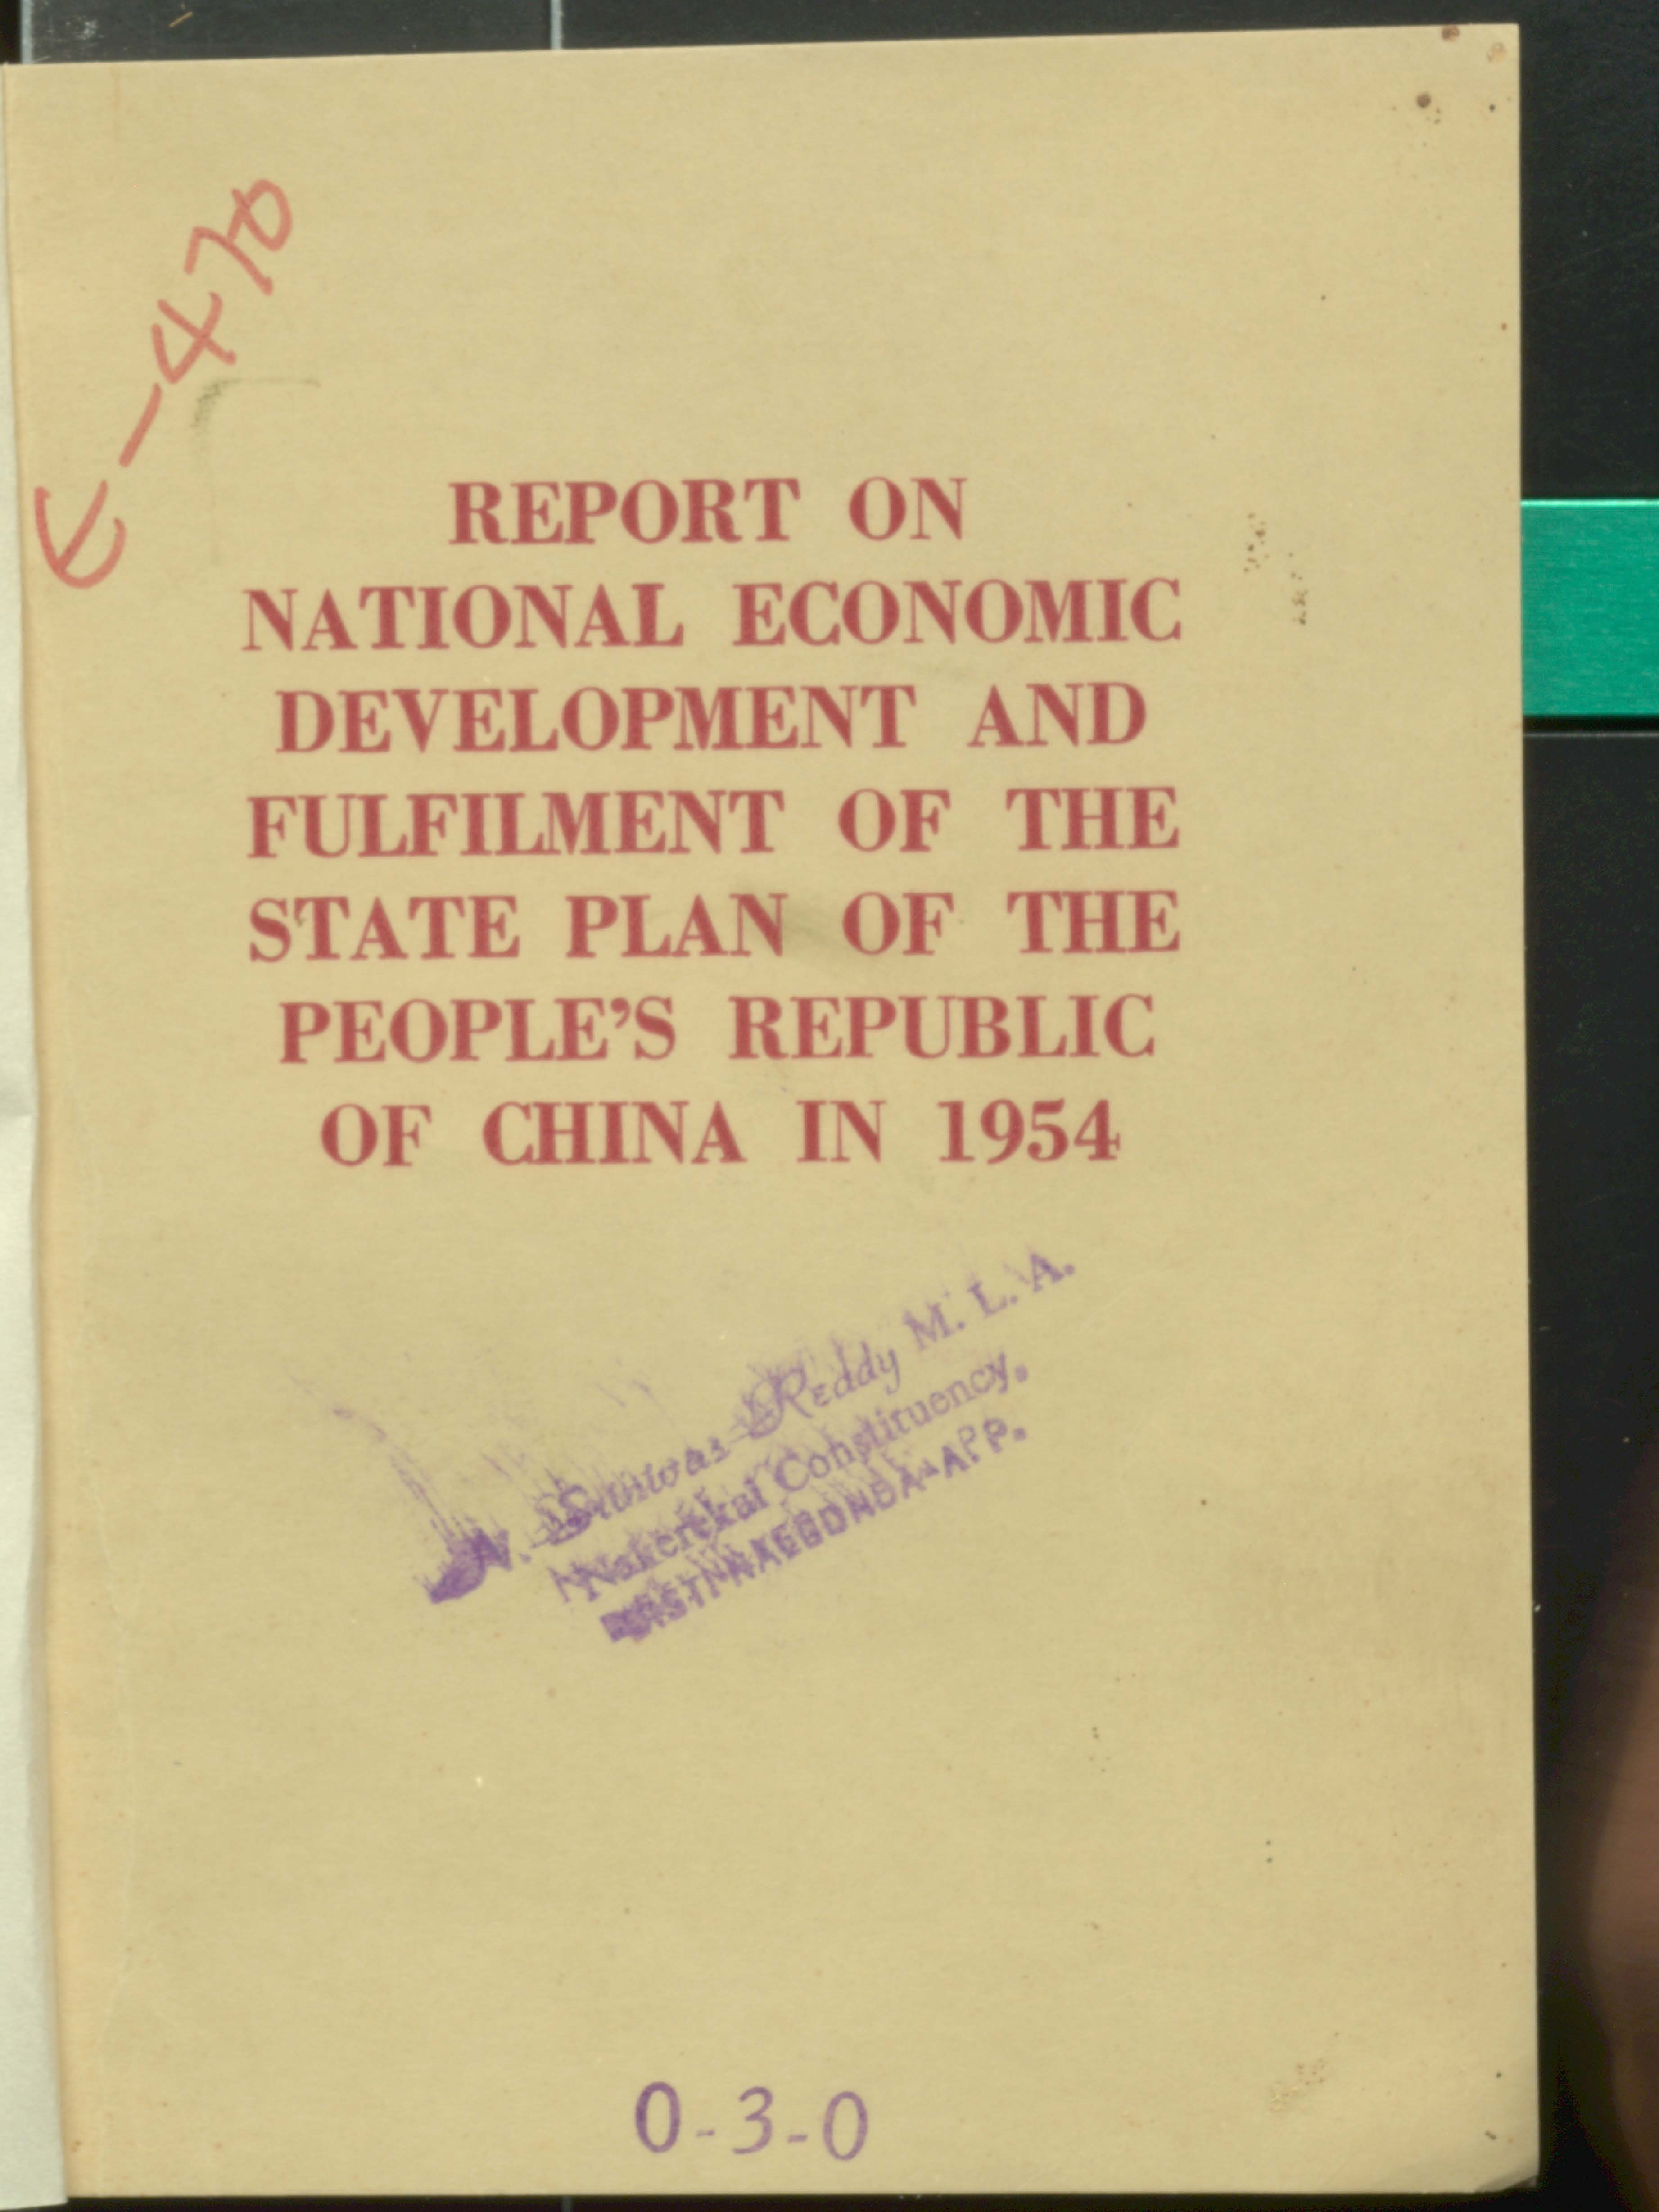 Report on national Economic Devolopment and Fulfilment of the state plan of the people's republic of china in (1954)